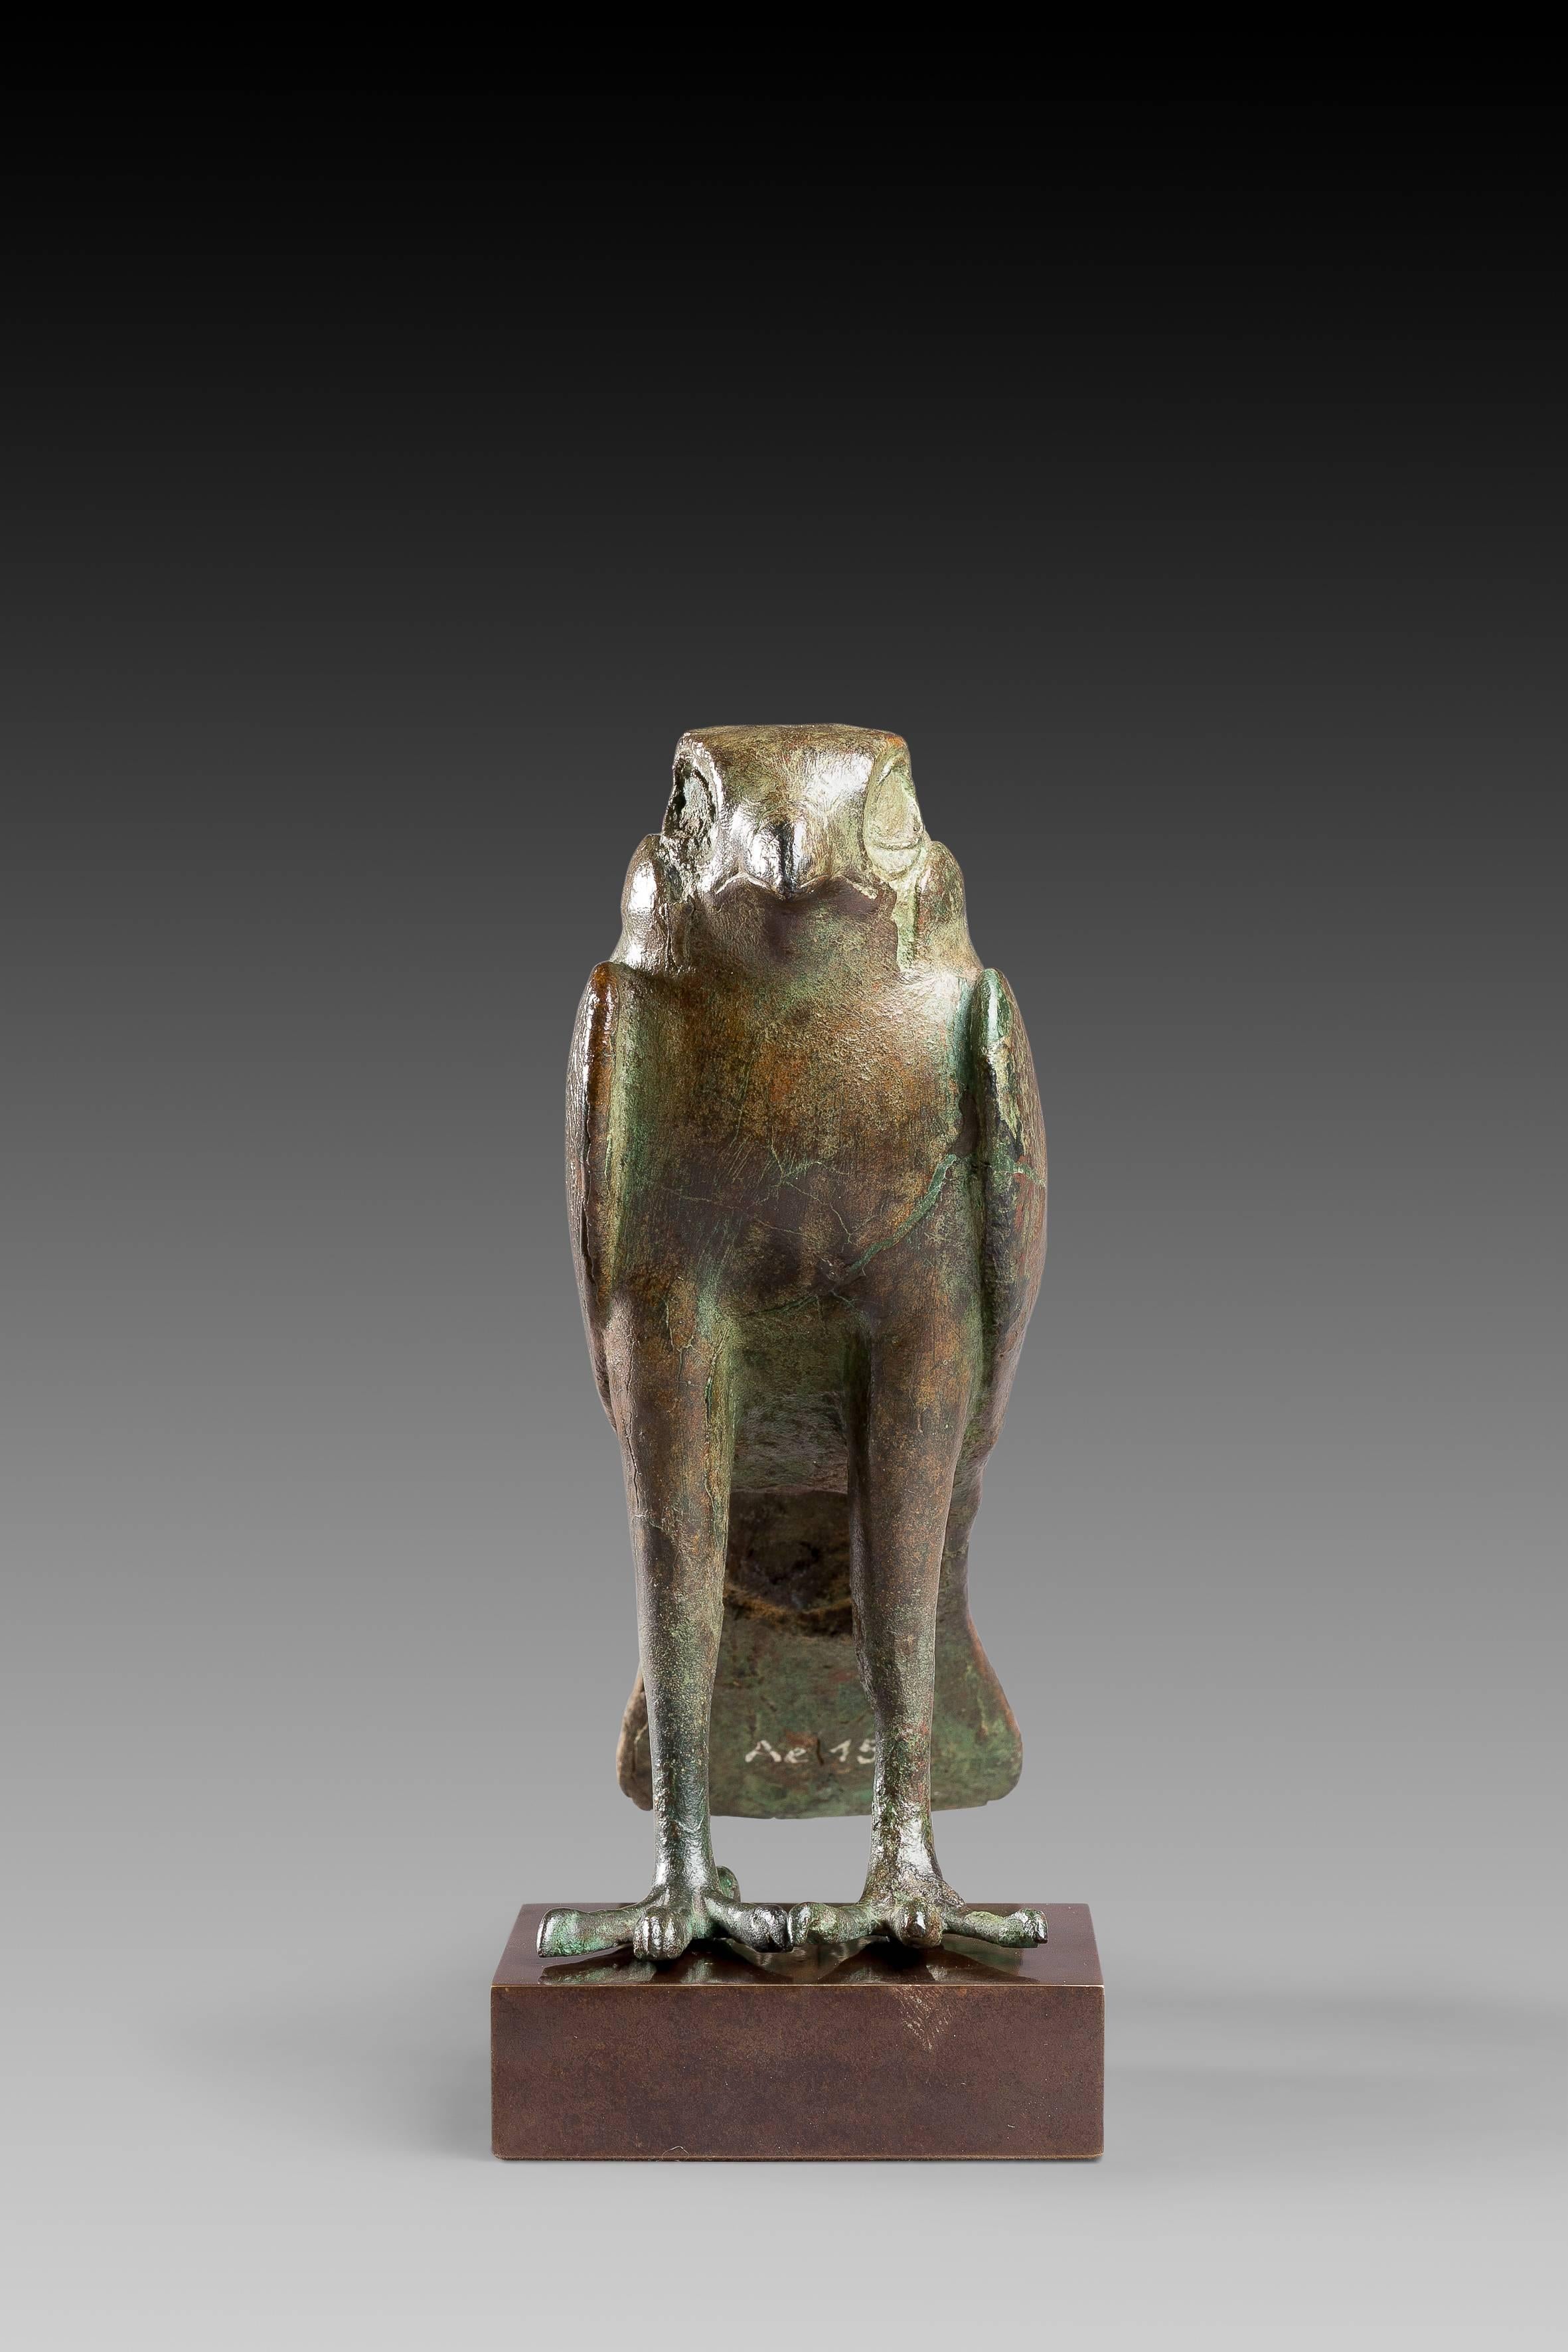 Egyptian hollow cast bronze statue of Horus in his incarnation as a falcon. The eyes are rescessed for inlay and the details of the plummage finely engraved. 

Egypt, Late Dynastic period, 664-343 BC. 

Bronze.

Provenance: Formerly in a